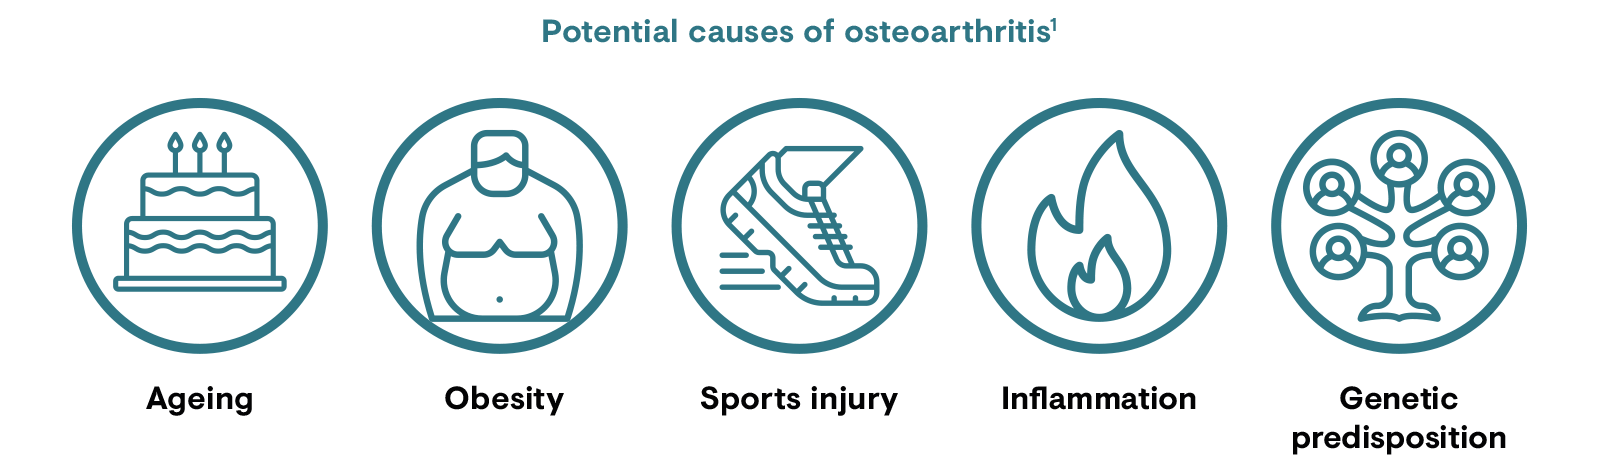 Potential causes of osteoarthritis